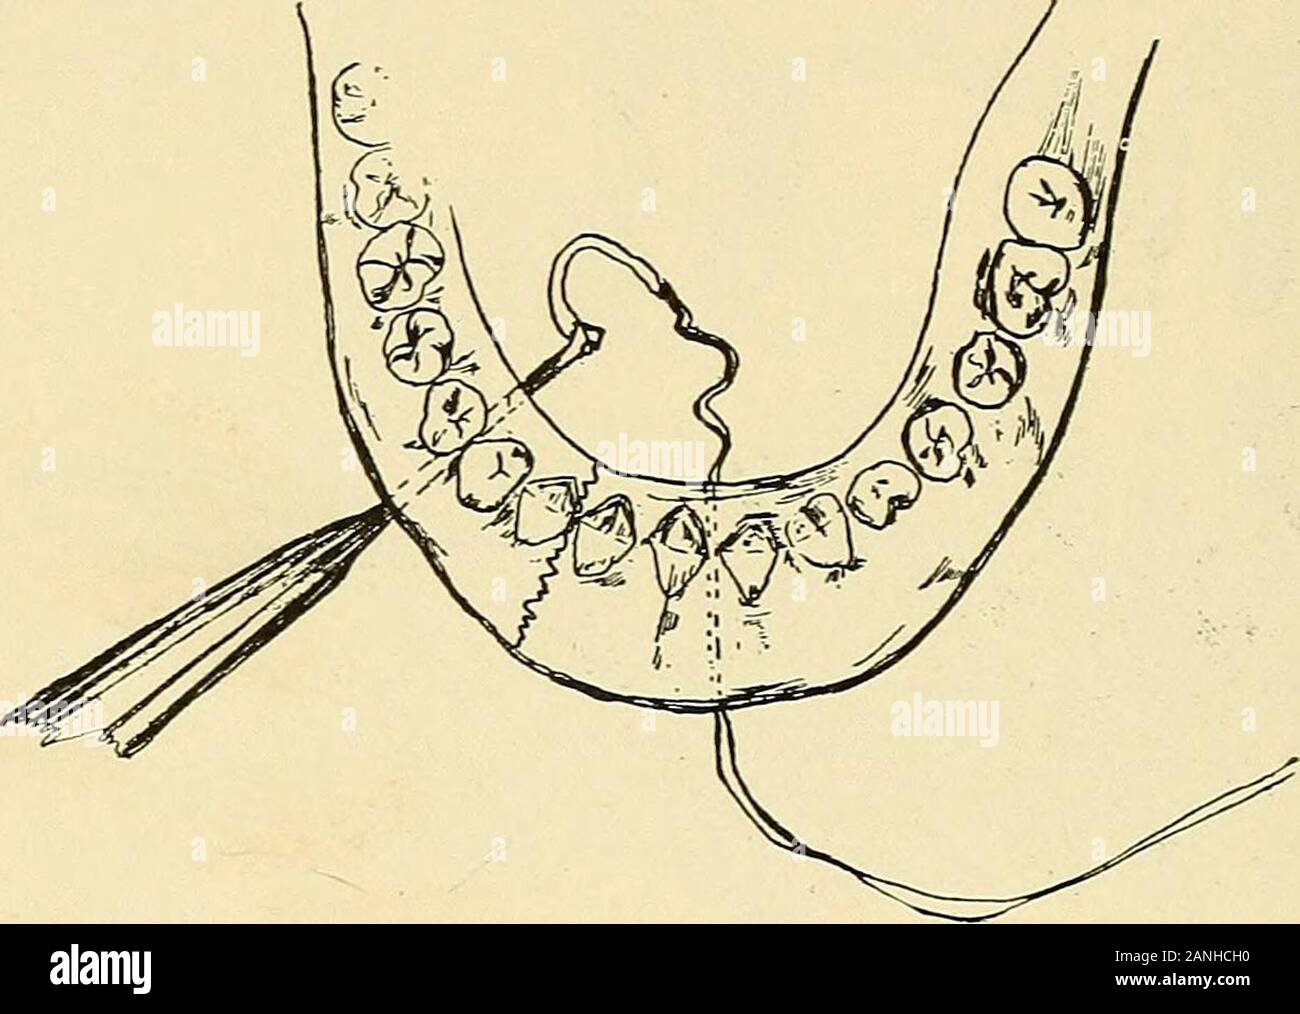 Oral surgery; a text-book on general surgery and medicine as applied to dentistry . Fig. 202.—Notched Drill and Wire. Showing method of attaching thread. of about half an inch. The object in wiring was to pull theanterior fragment upward against the posterior. Sincethe molar was perfectly solid, it served for an anchorage.The drill was passed through between the roots of the bi-cuspids. This furnished an upward and backward tractionand a perfect adjustment w^as not difficult. Union followed,and the wire was removed in six weeks, with perfect articu-lation and no external deformity. 400 FRACTUR Stock Photo